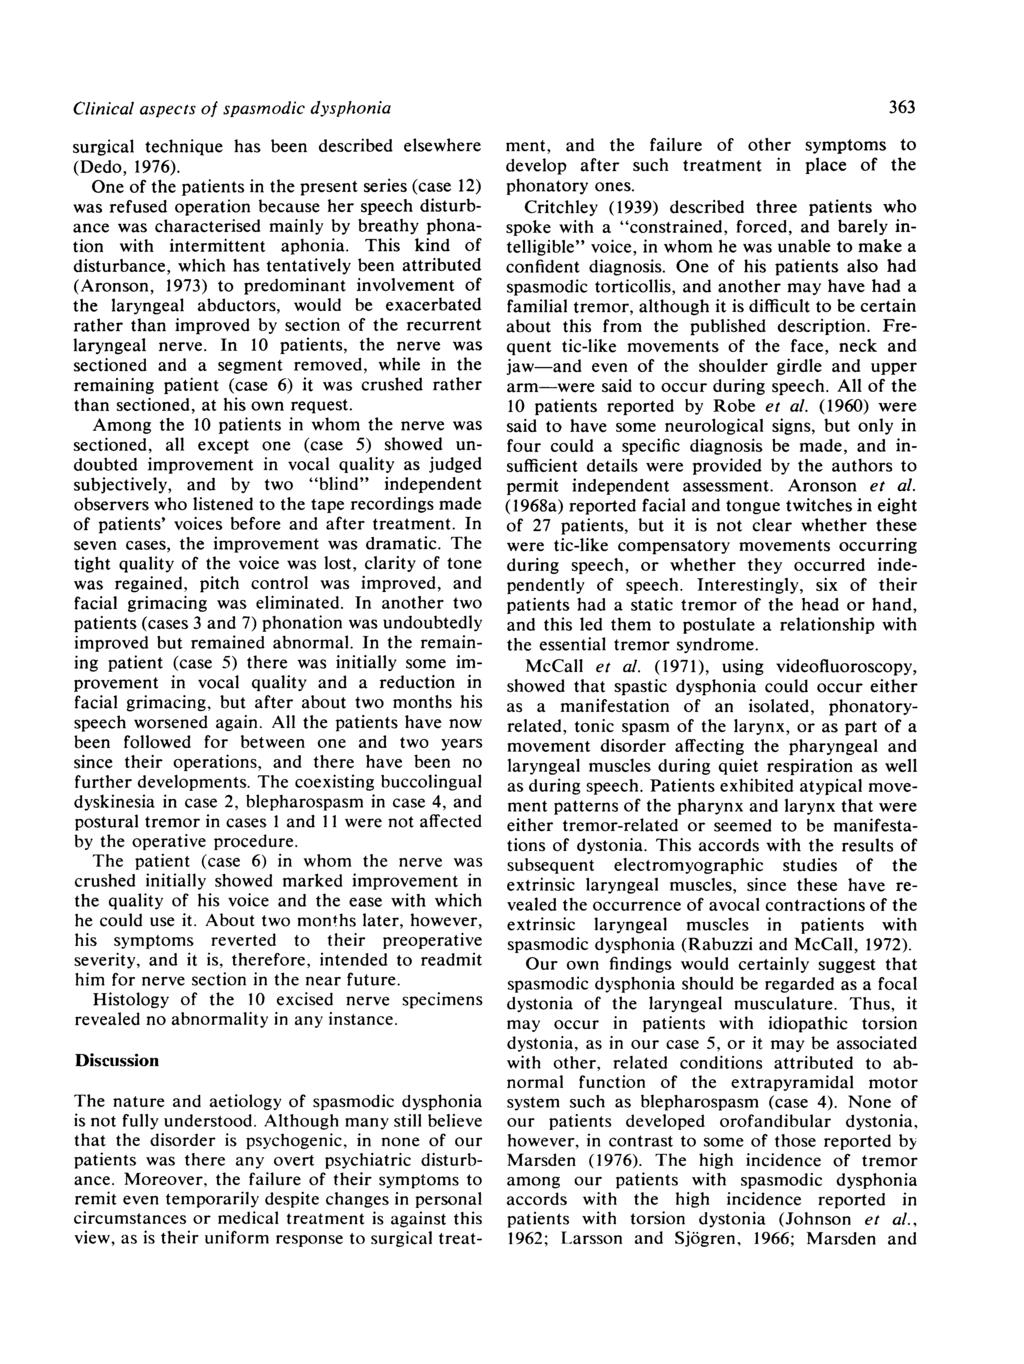 Clinical aspects of spasmodic dysphonia surgical technique has been described elsewhere (Dedo, 1976).